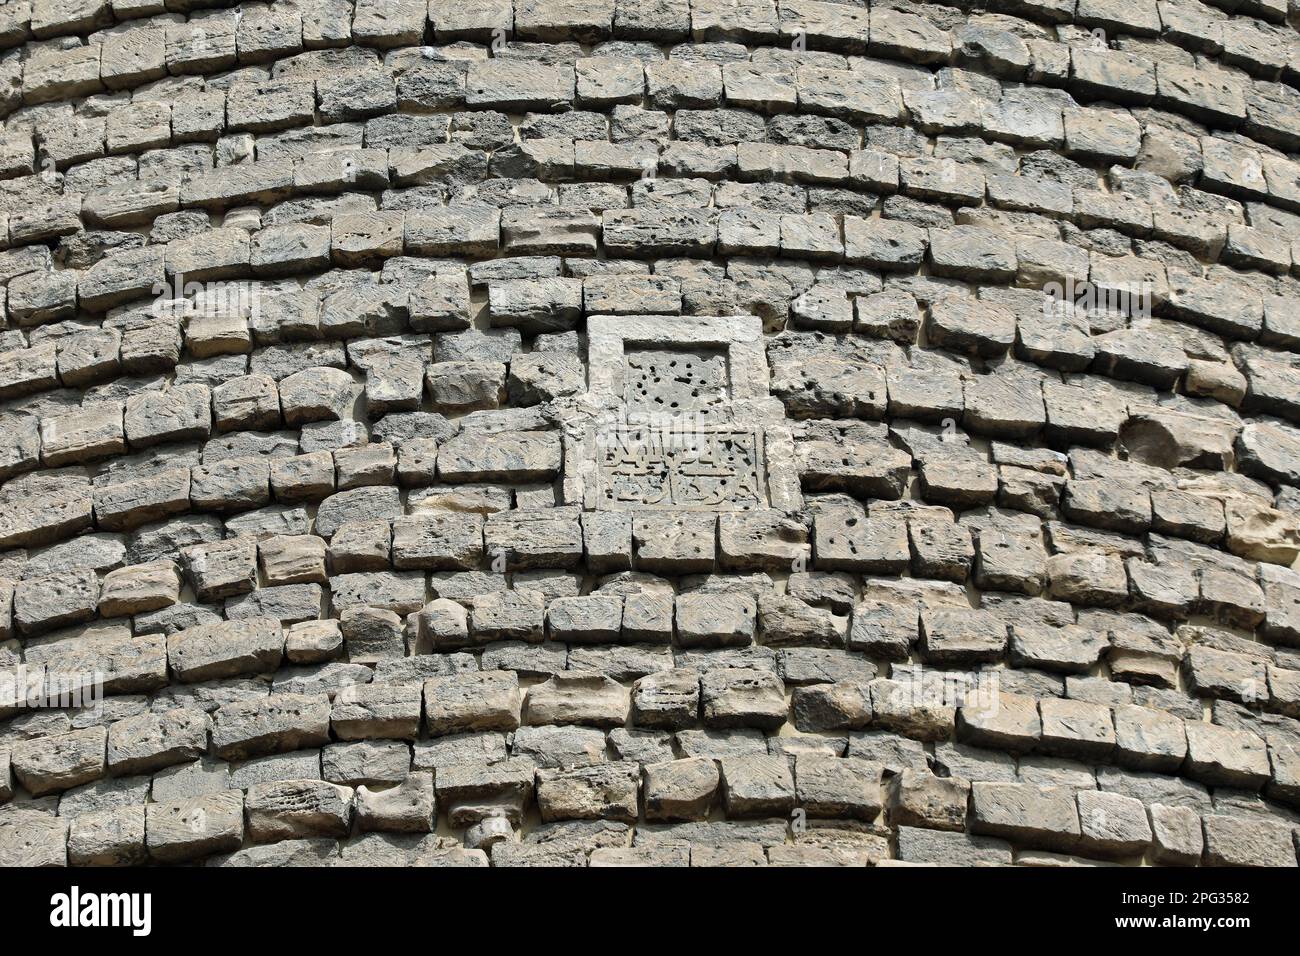 Kufic inscription on the south wall of the Maiden Tower in Baku Stock Photo